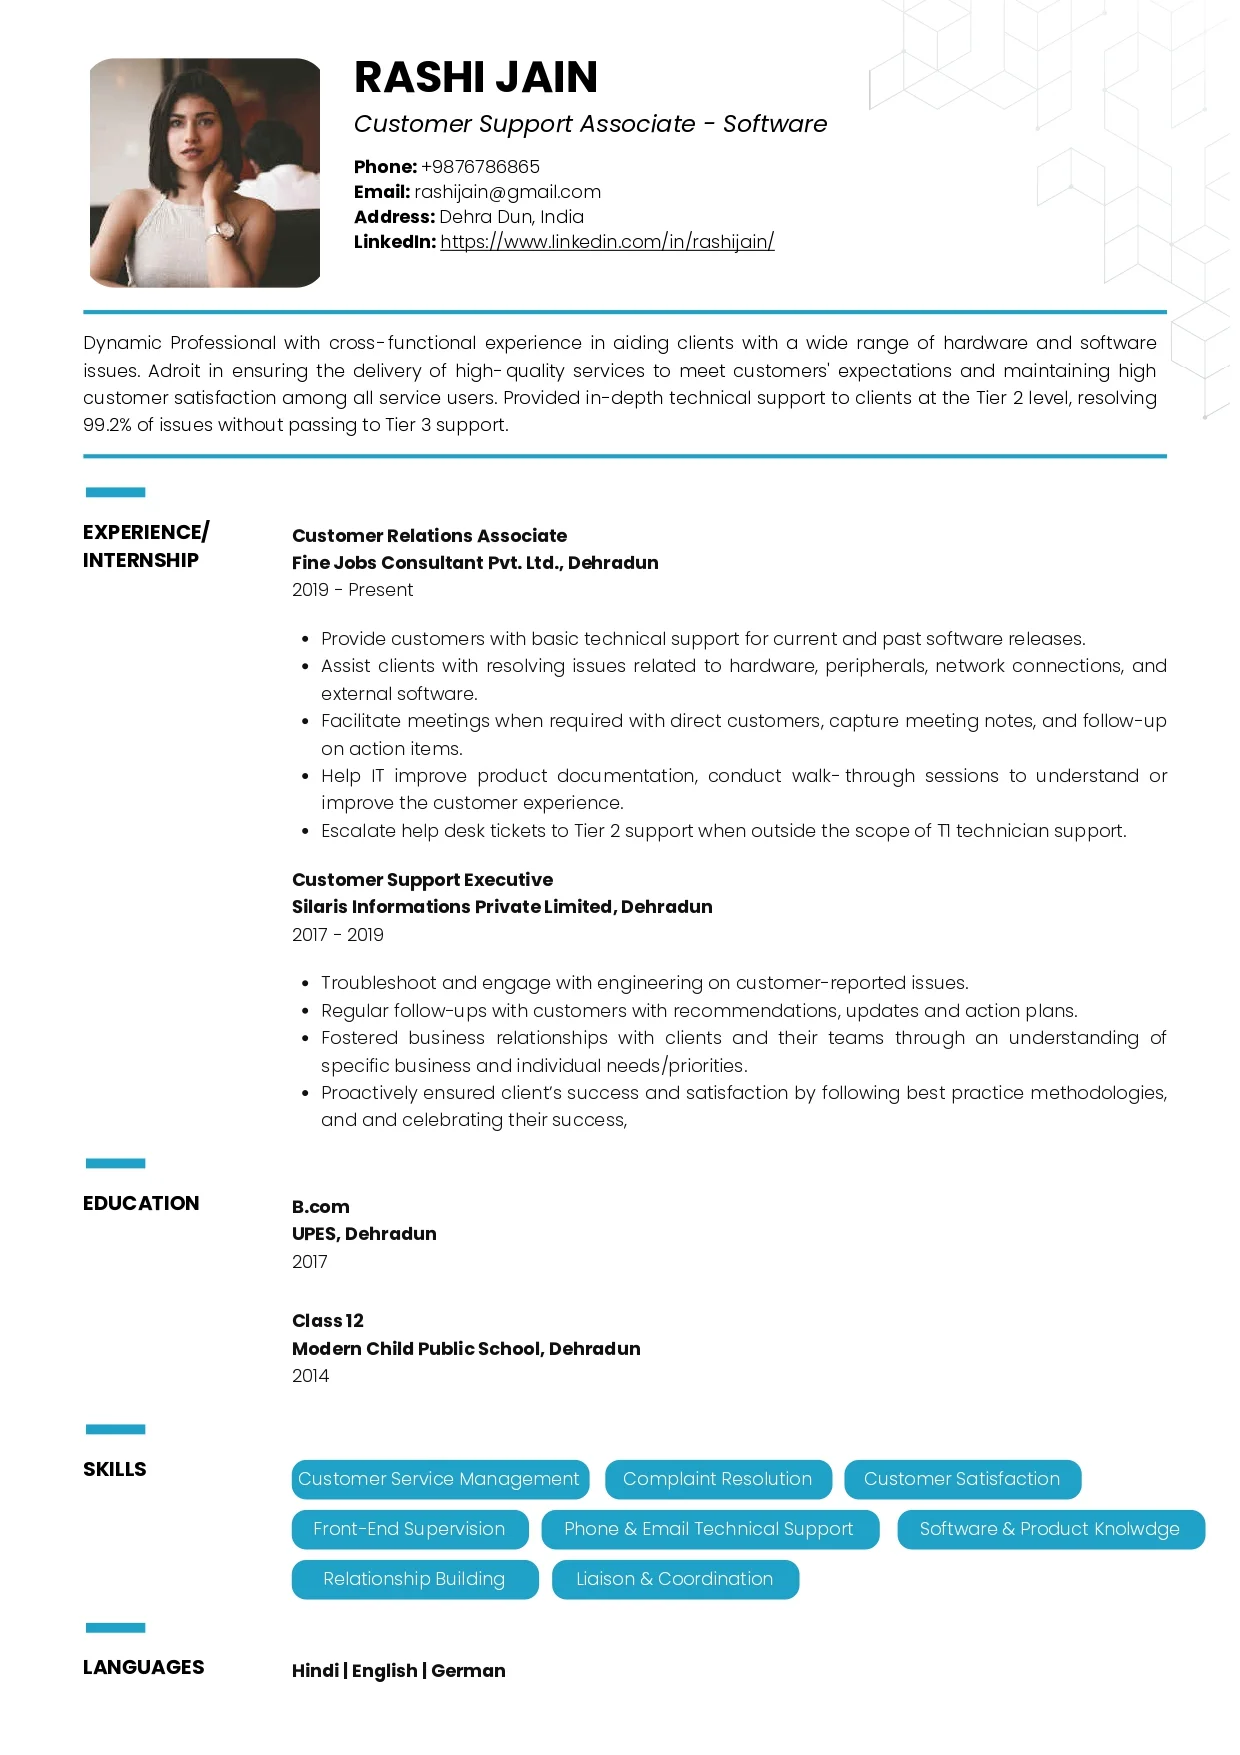 Sample Resume of  Customer Support Associate - Software | Free Resume Templates & Samples on Resumod.co